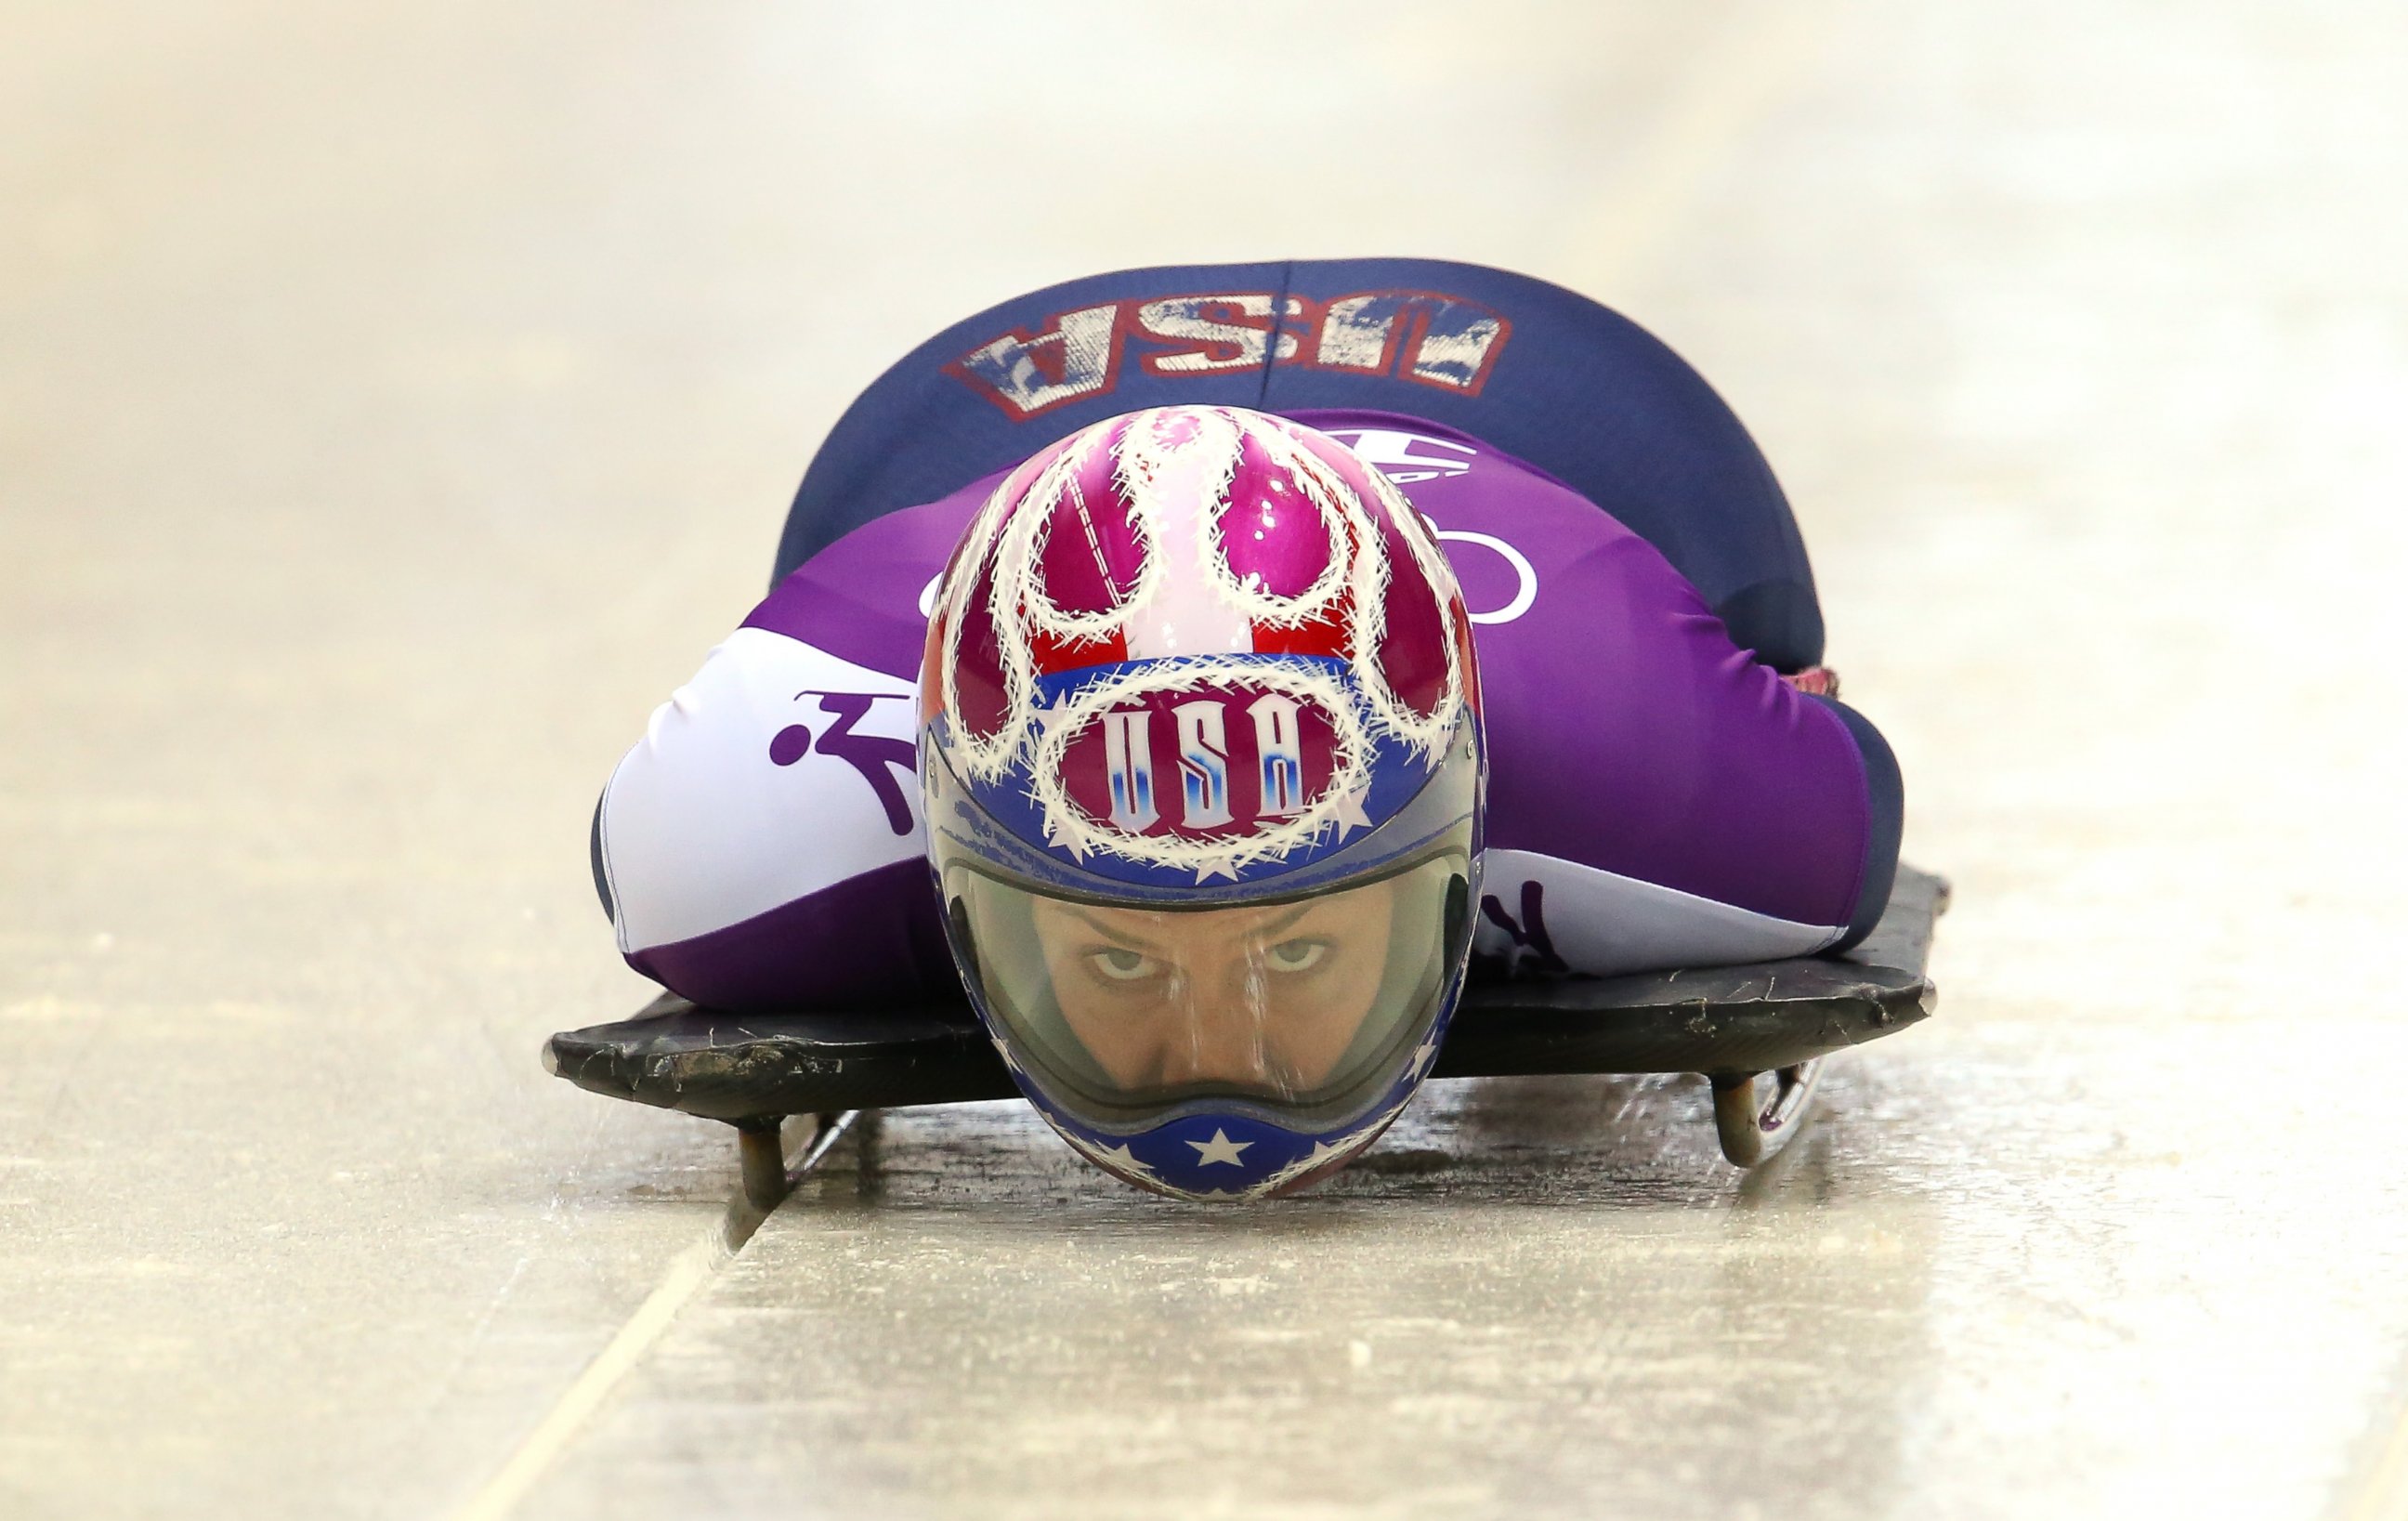 PHOTO: Noelle Pikus-Pace of USA practices during a Women's Skeleton training session 